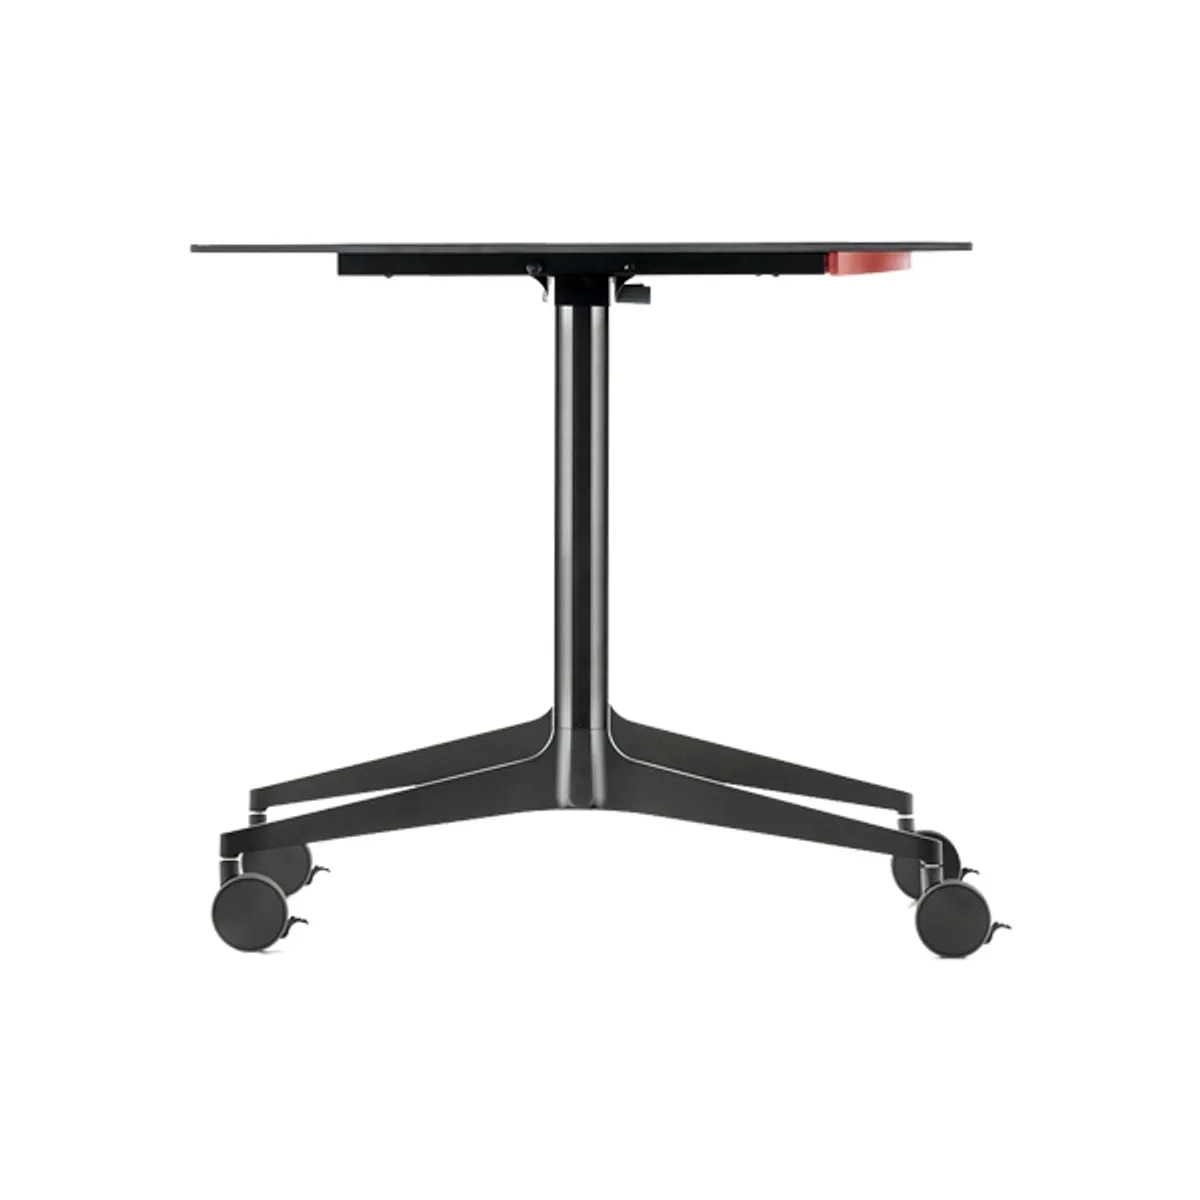 Ypsilon Tilting Table Inside Out Contracts4